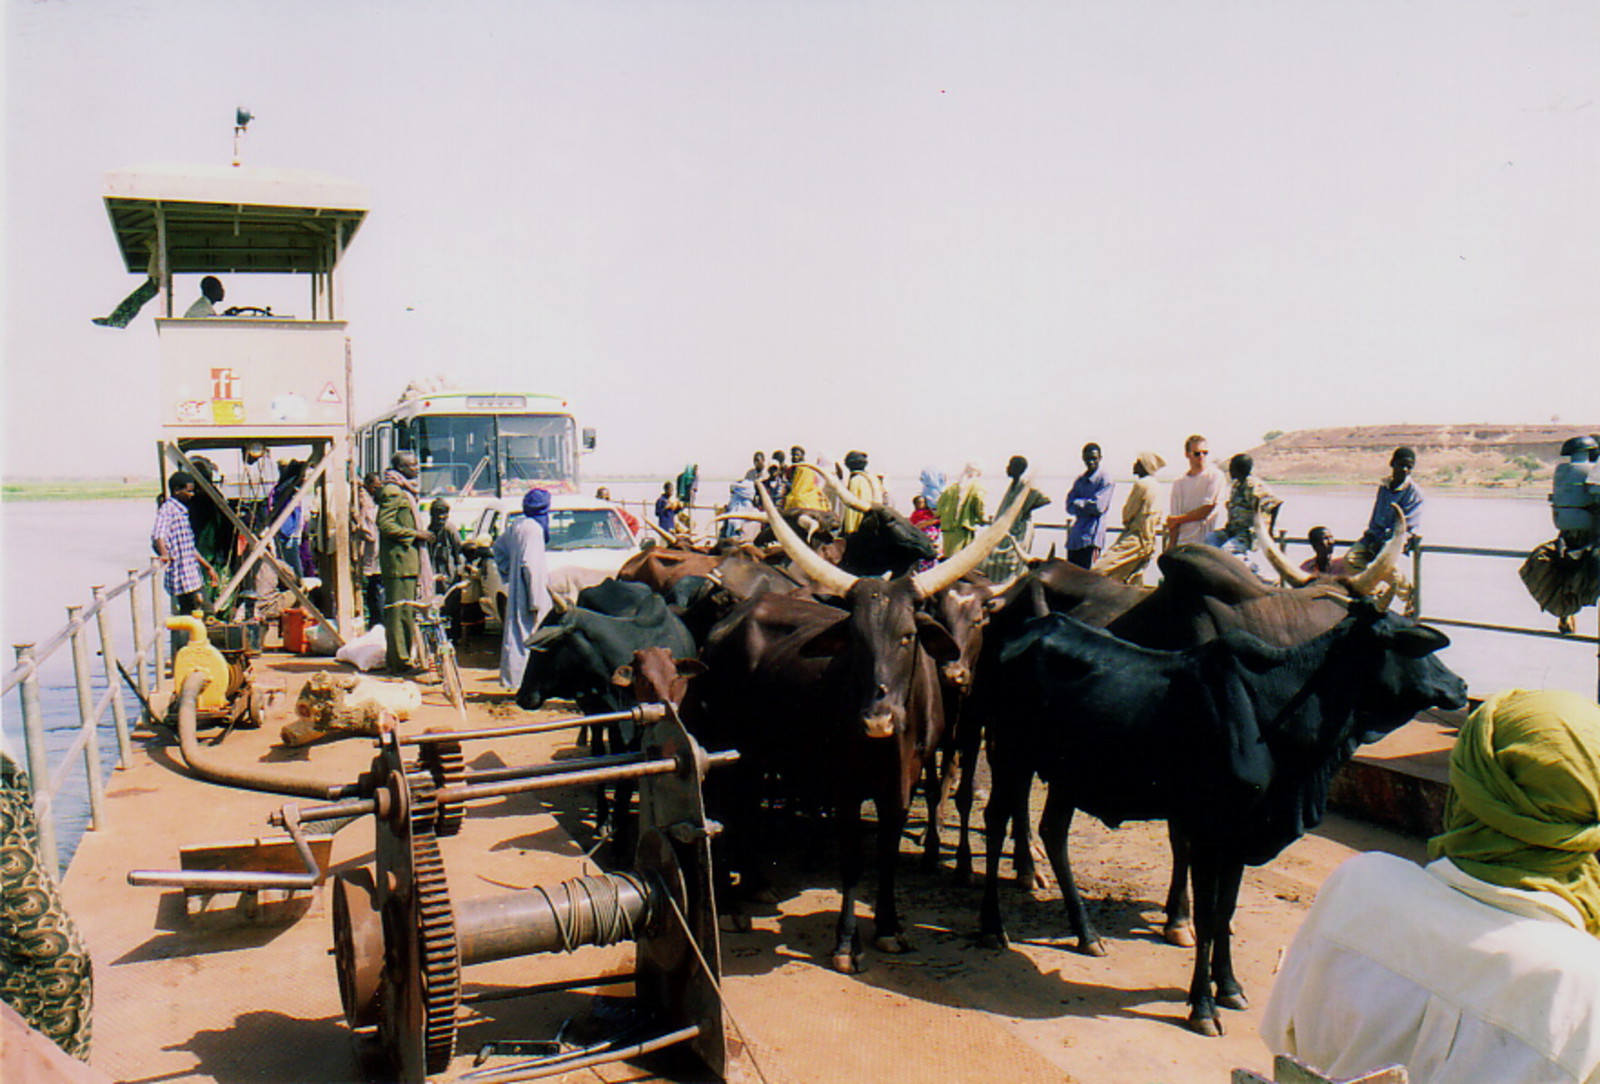 The ferry across the River Niger on the way out of Gao